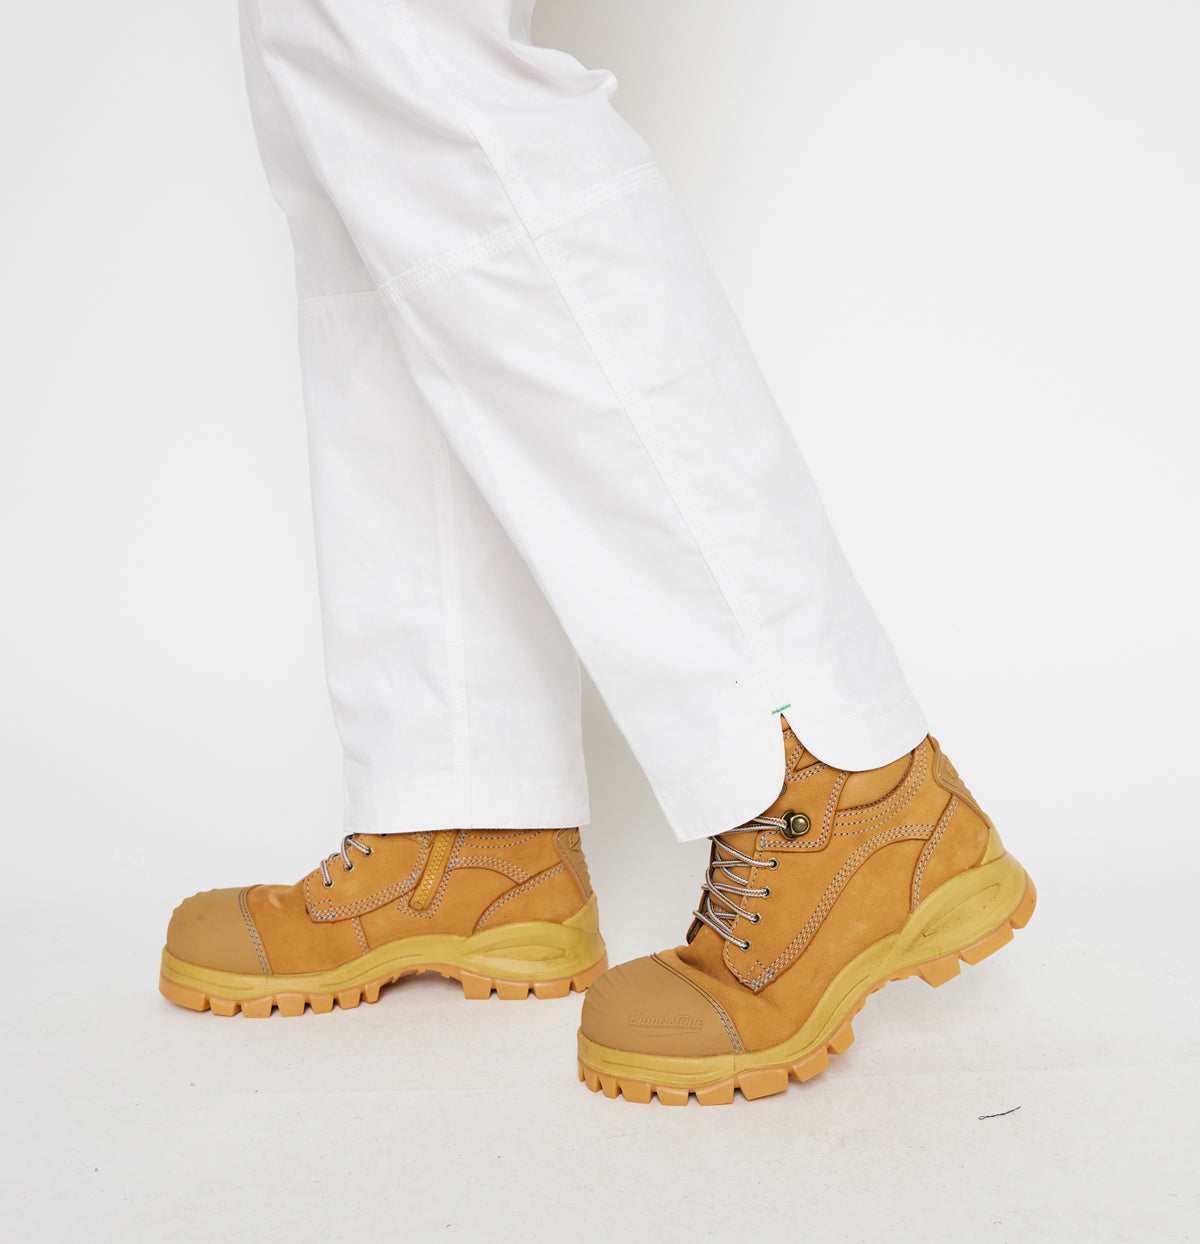 Utility Work Pants - Intuition - Painters Whites